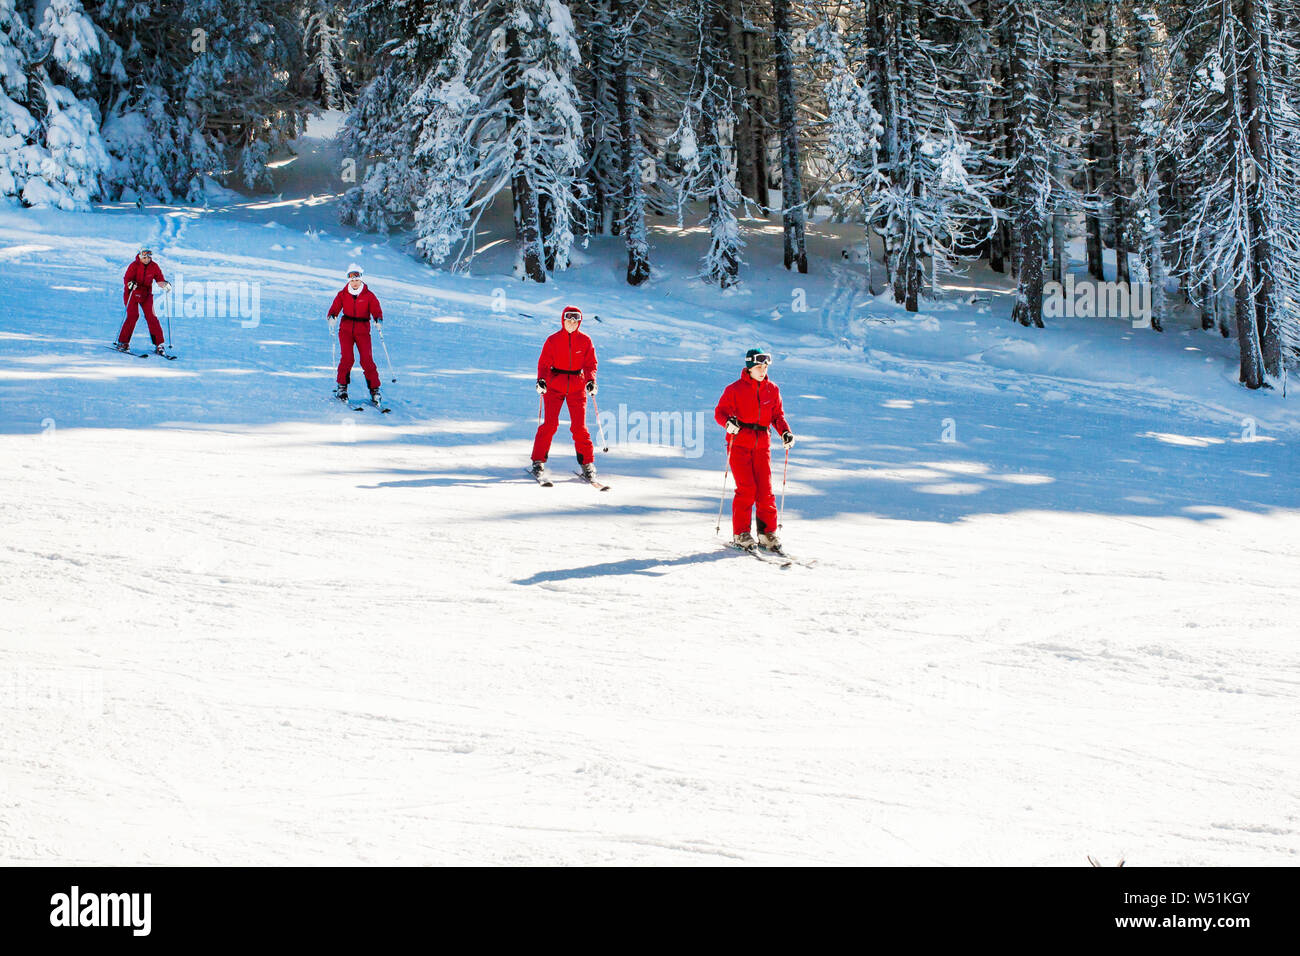 Kopaonik, Serbia - January 20, 2016:  Many women in vibrant red ski jackets skiing at the slope one after another. Learn to ski Stock Photo